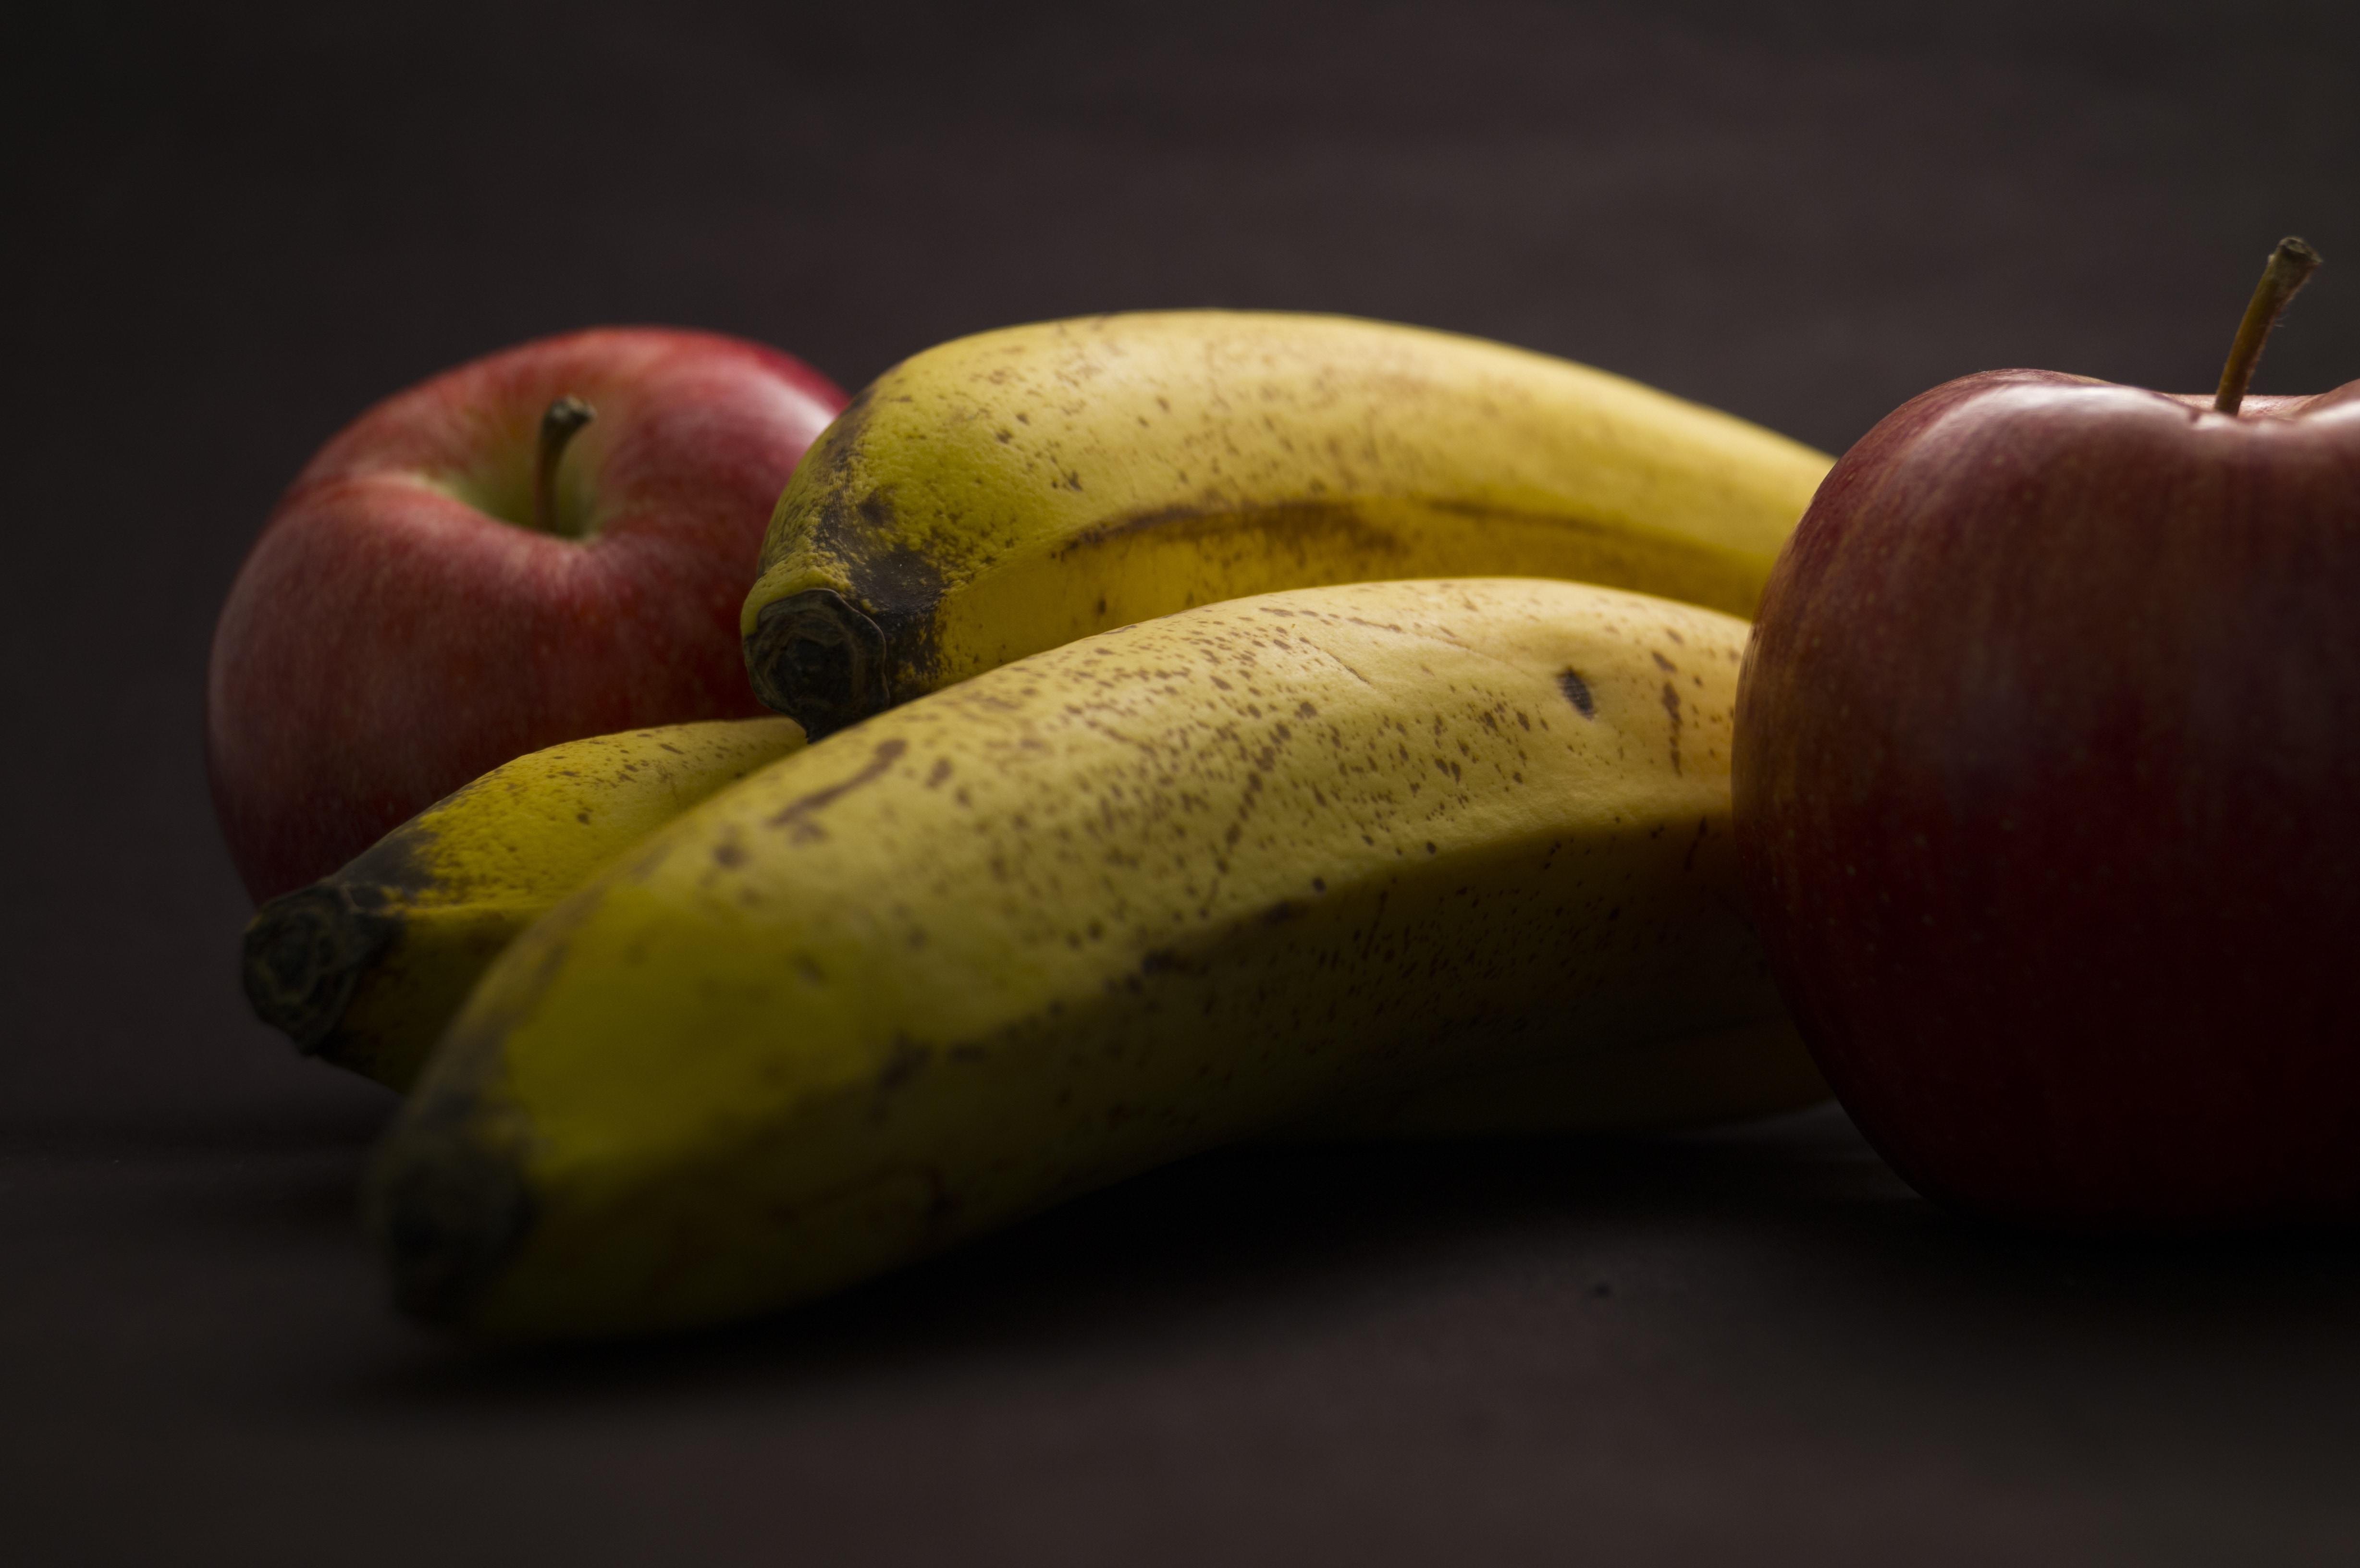 3 yellow bananas and 2 red apples